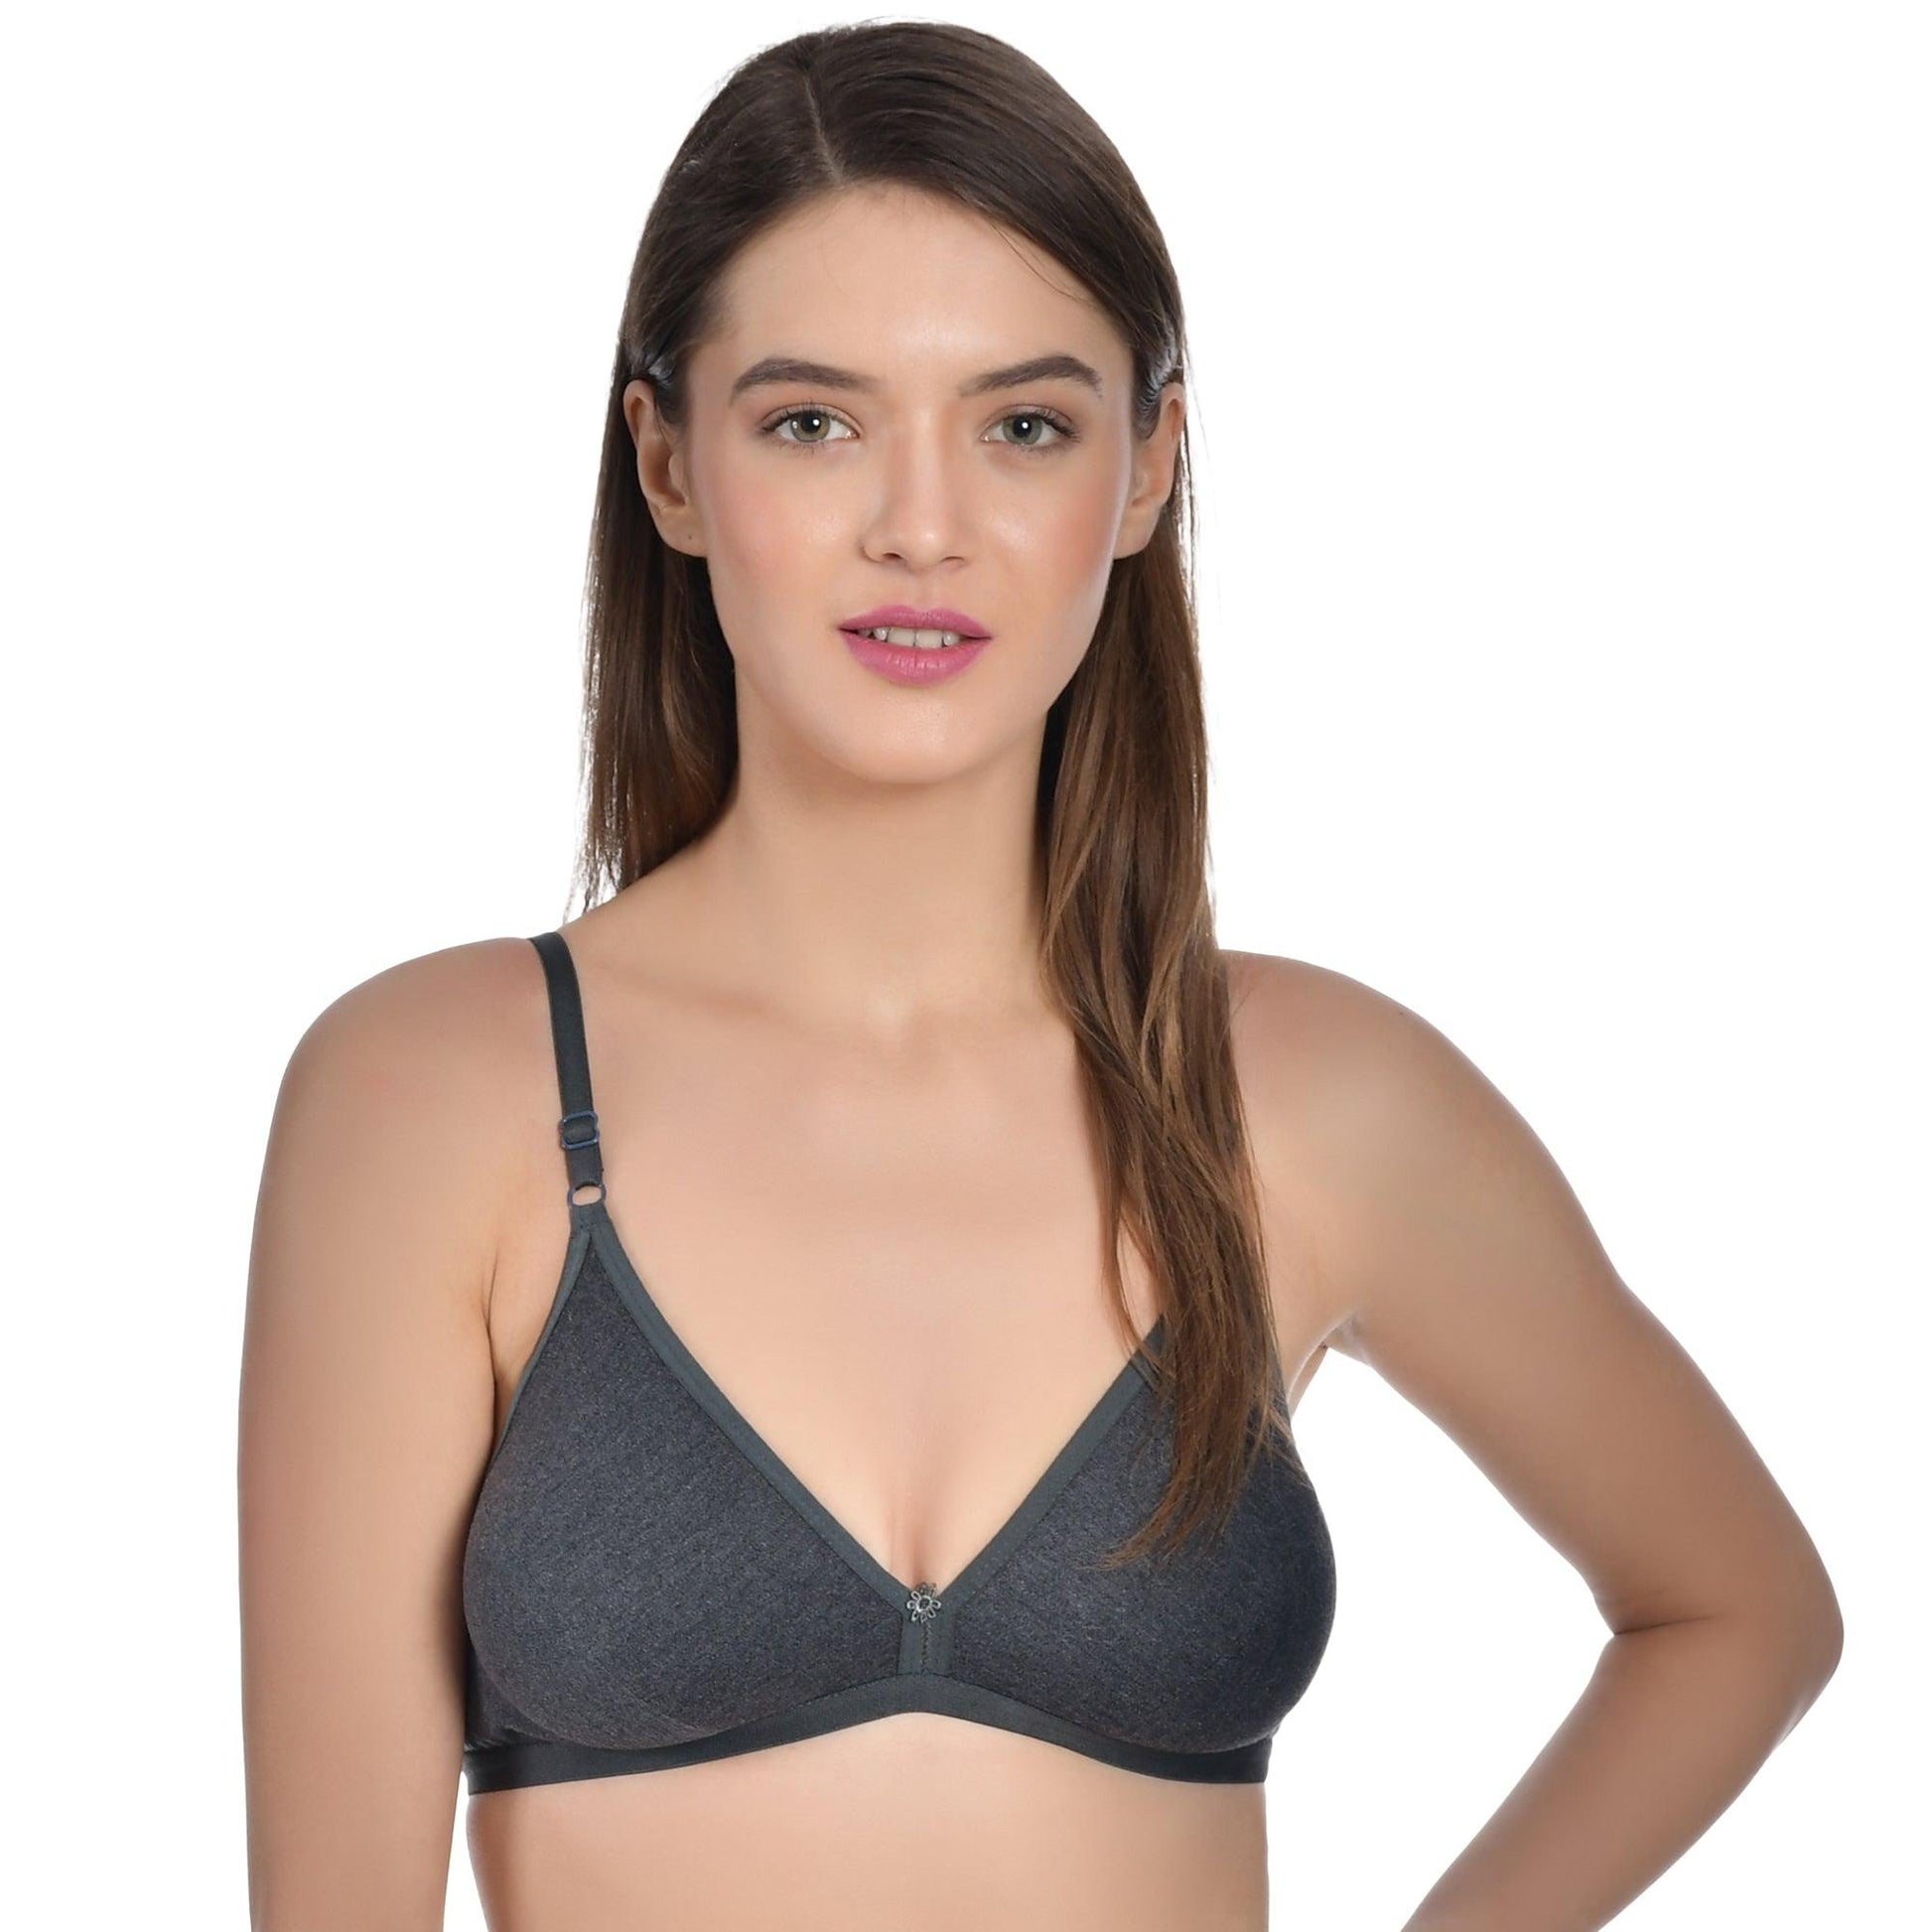 Women's Cotton Non-Wired Non-Padded Low Coverage Regular Bra